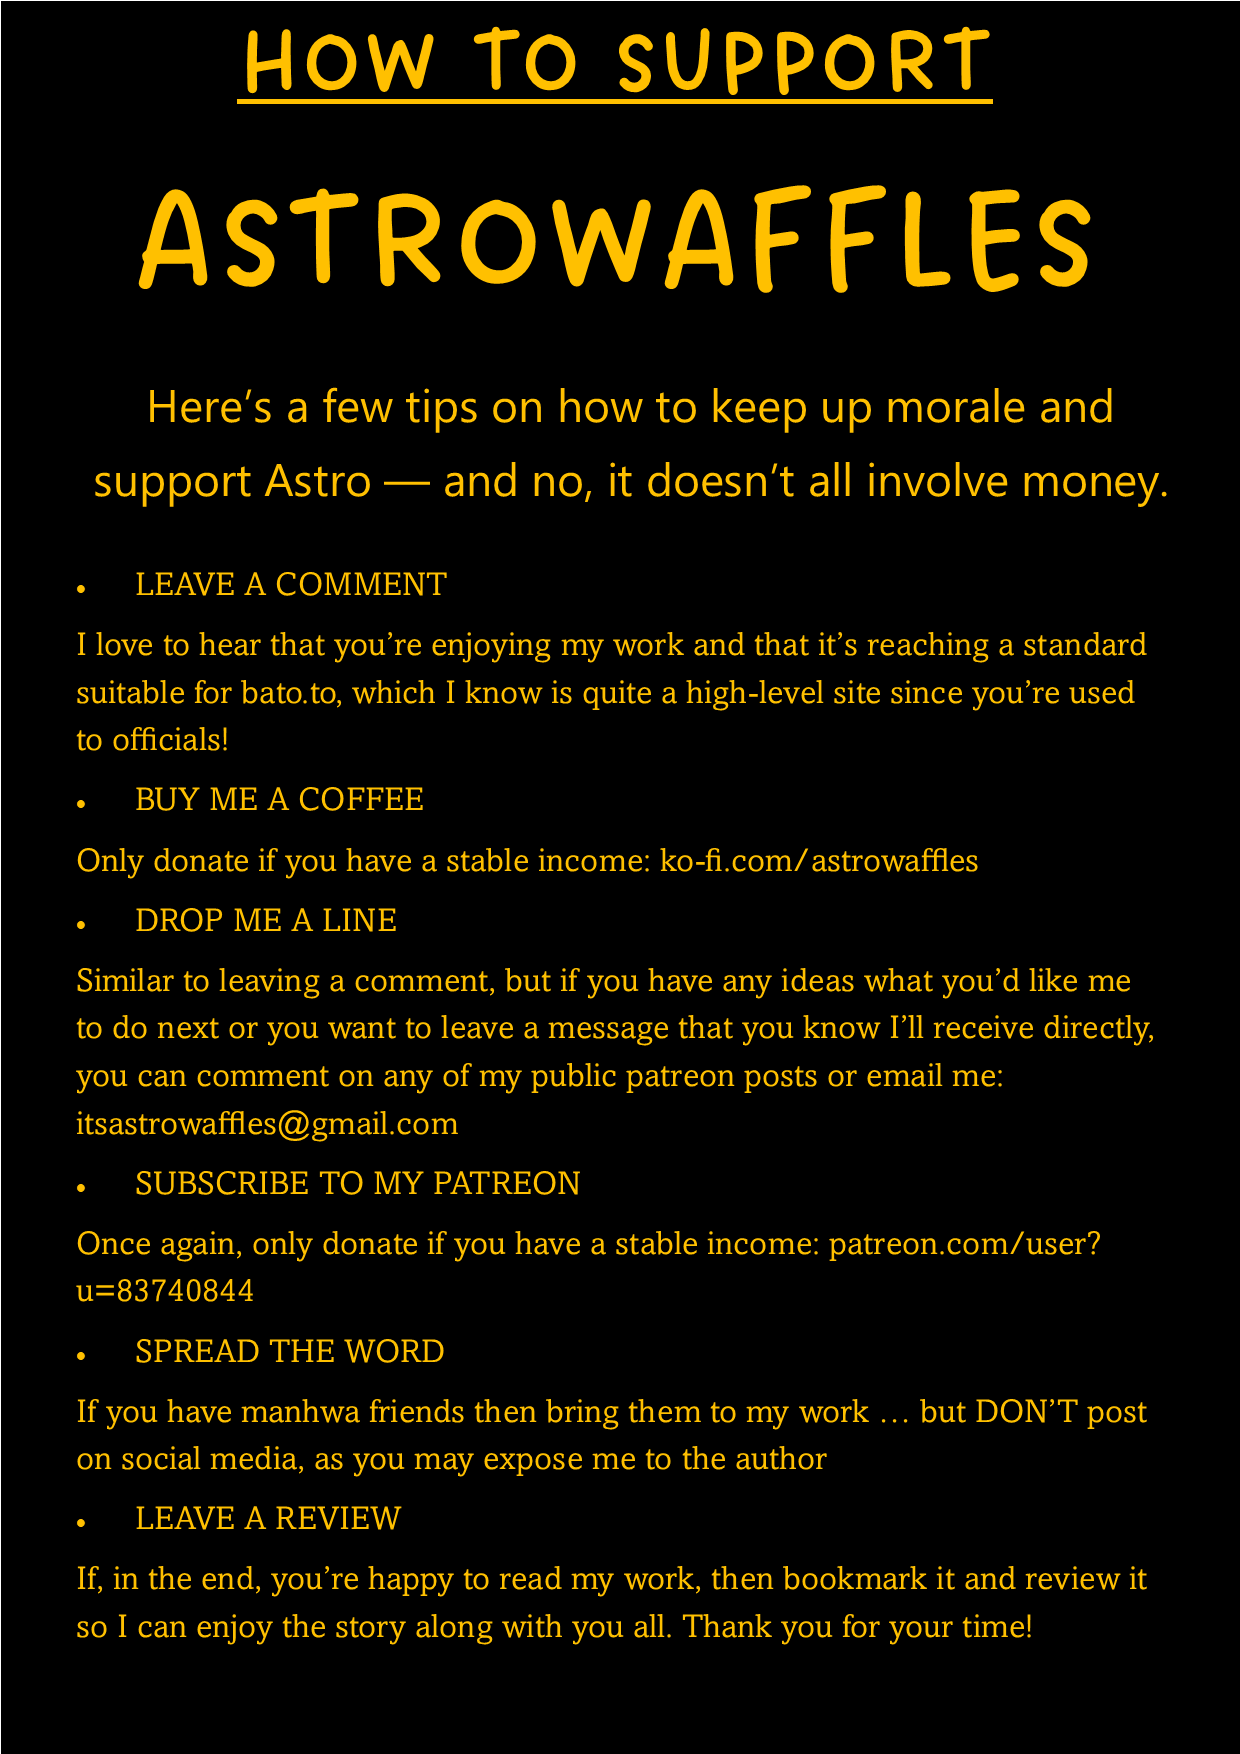 How can you support Astro?